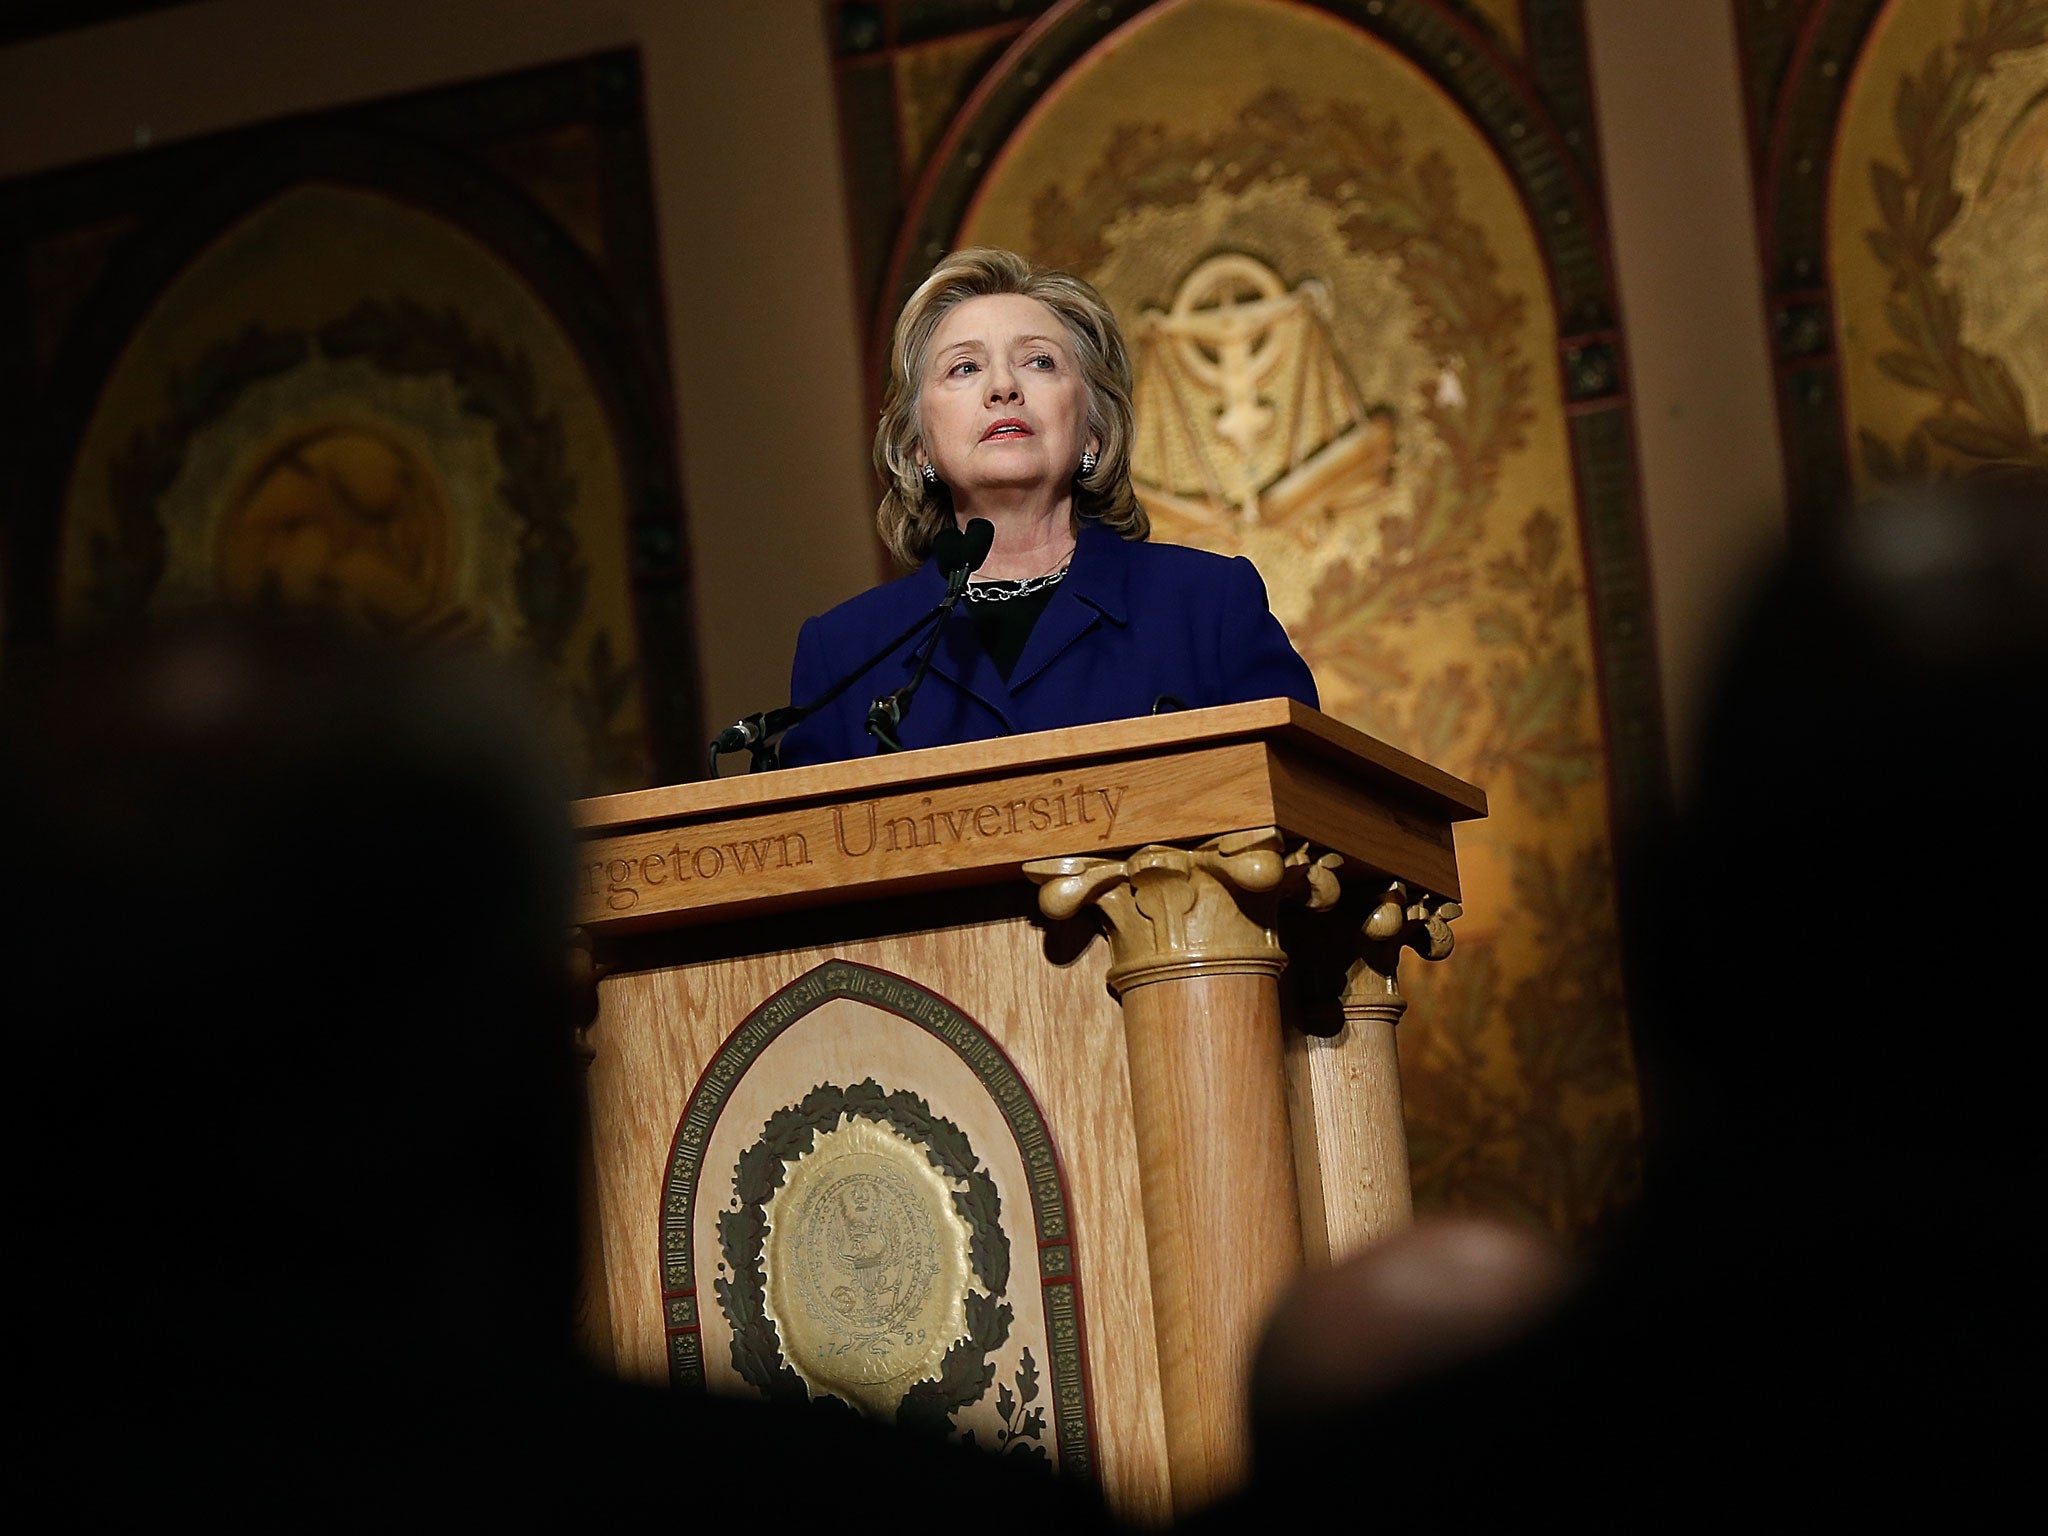 Hillary Clinton has yet to declare her 2016 candidacy